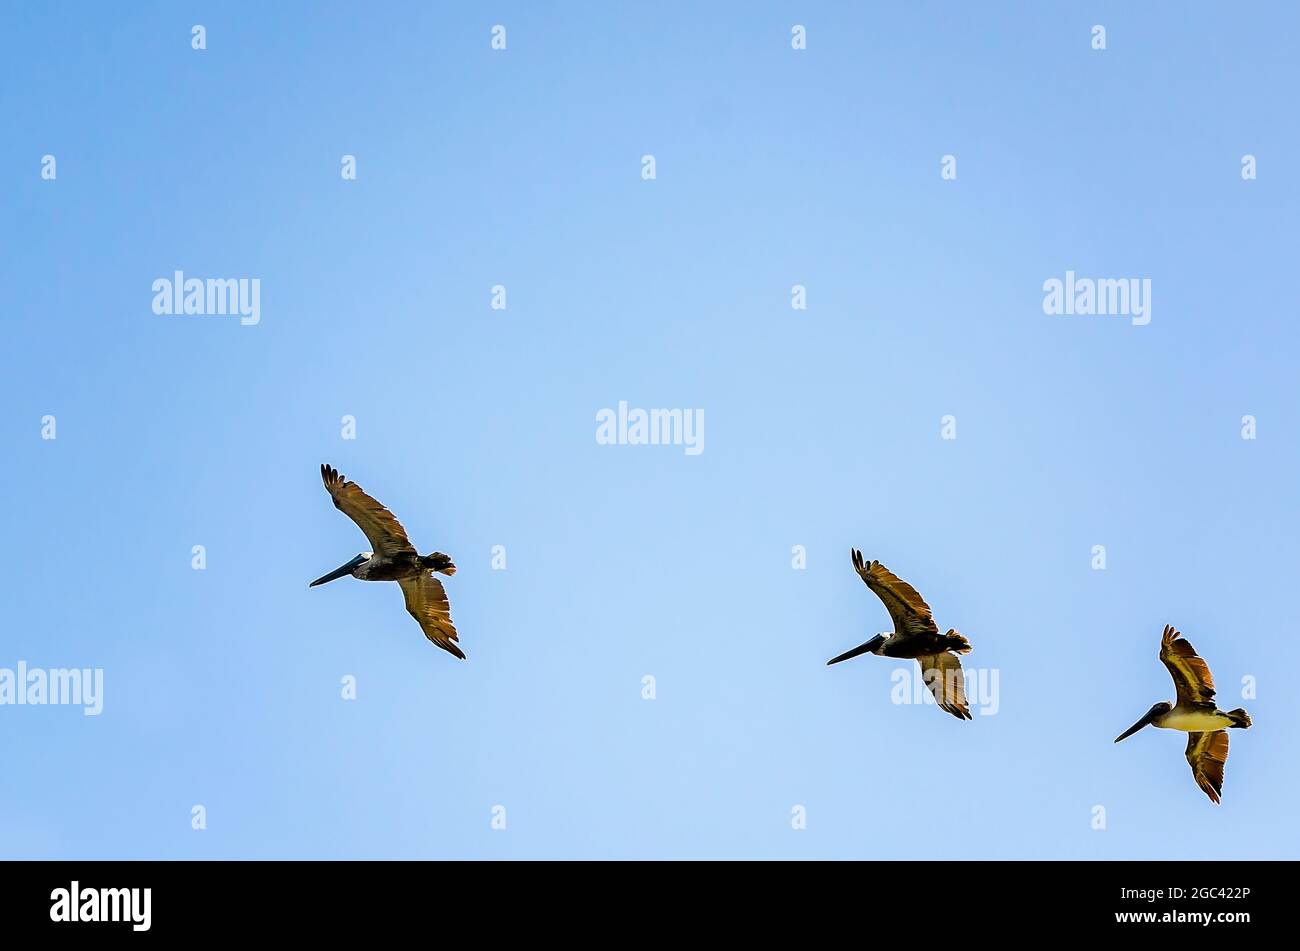 Brown pelicans fly high in the sky, July 13, 2021, in Coden, Alabama. Pelicans live an average of 15-25 years in the wild. Stock Photo